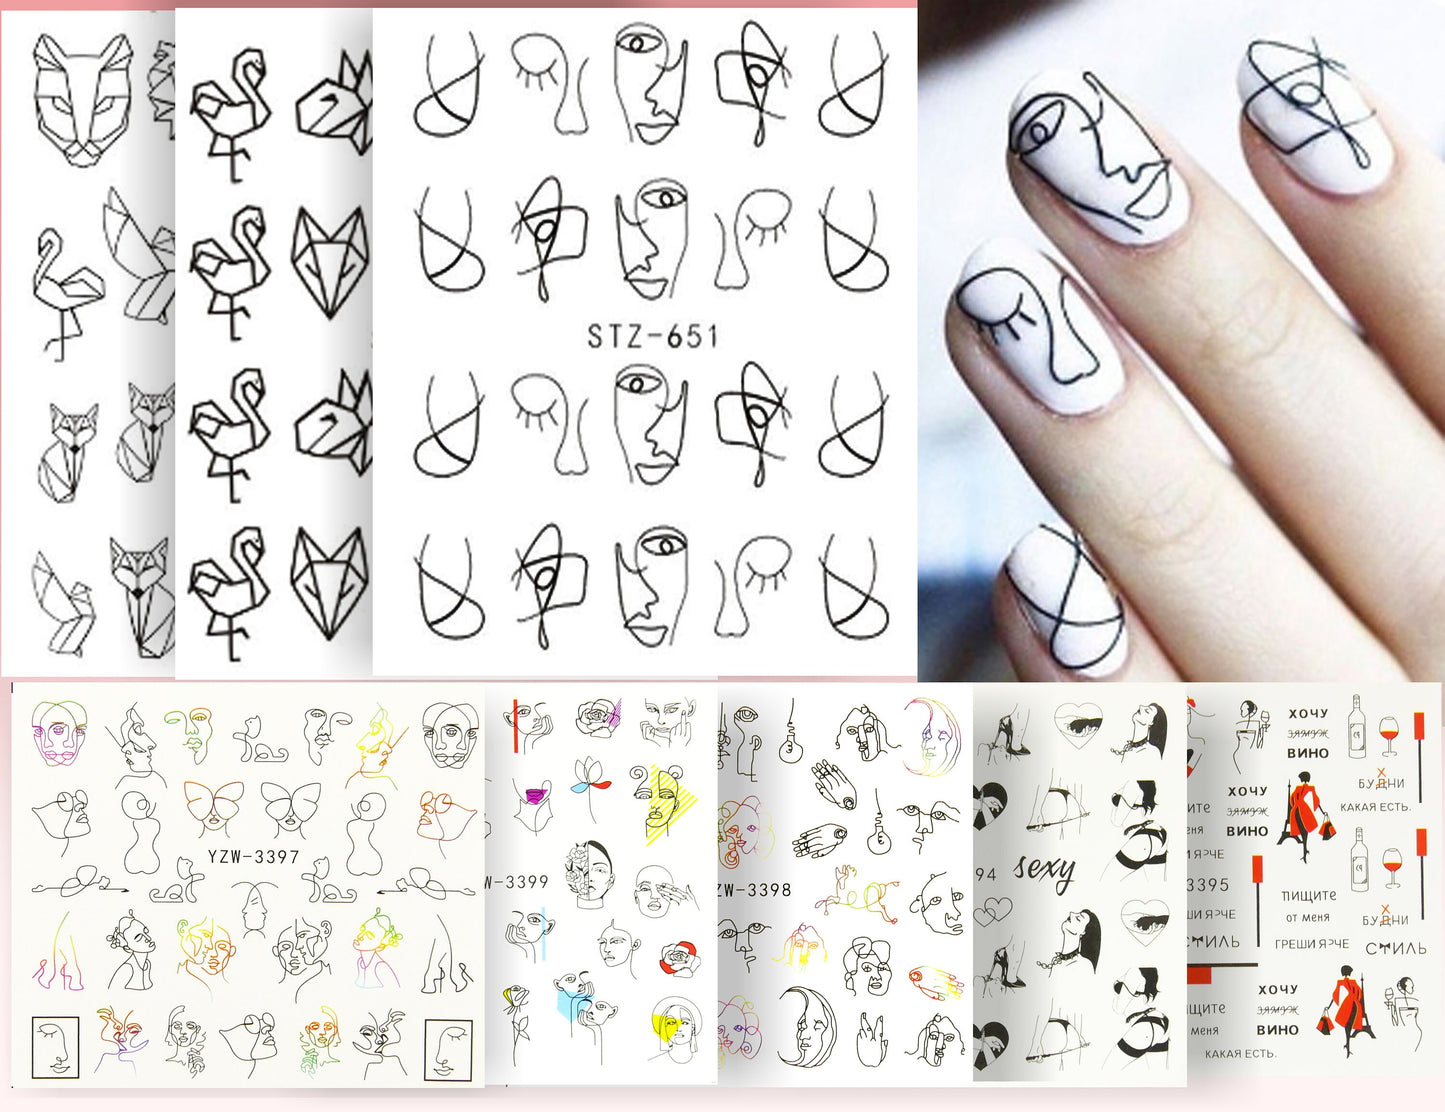 3 pcs Abstract pattern nail Tattoo/ Water transfer Minimalism Animal Outline Tattoos sticker/ linellae Women face nail Decals Supply